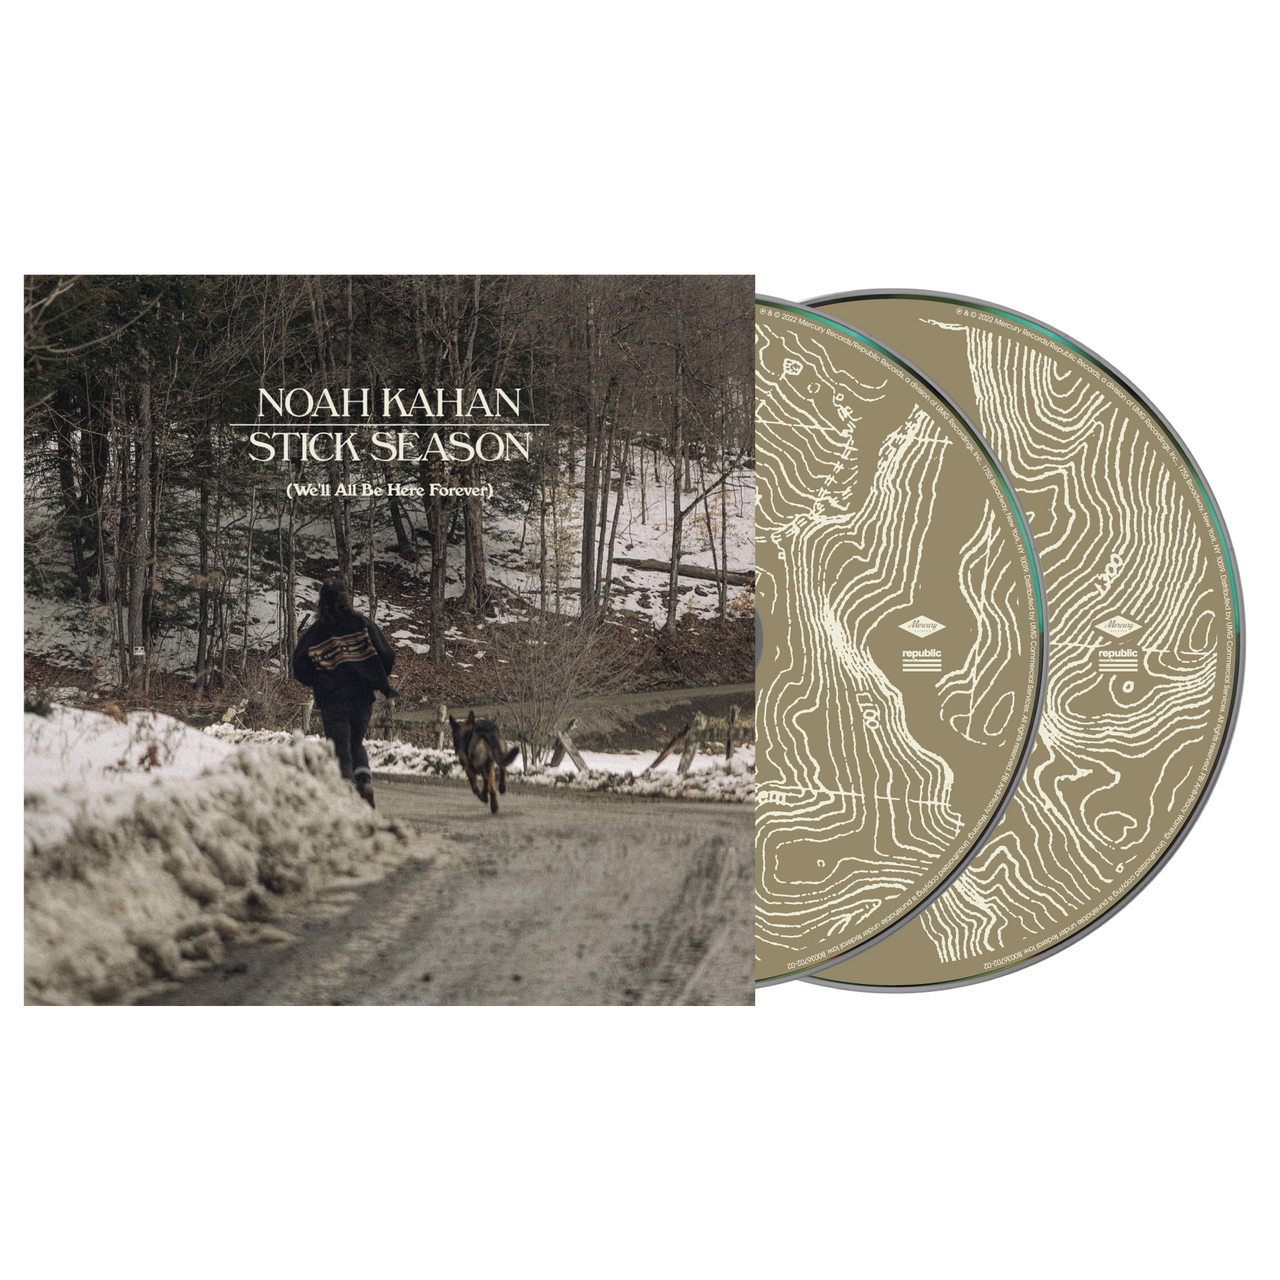 Noah Kahan: Stick Season (We'll All Be Here Forever) 2xCD